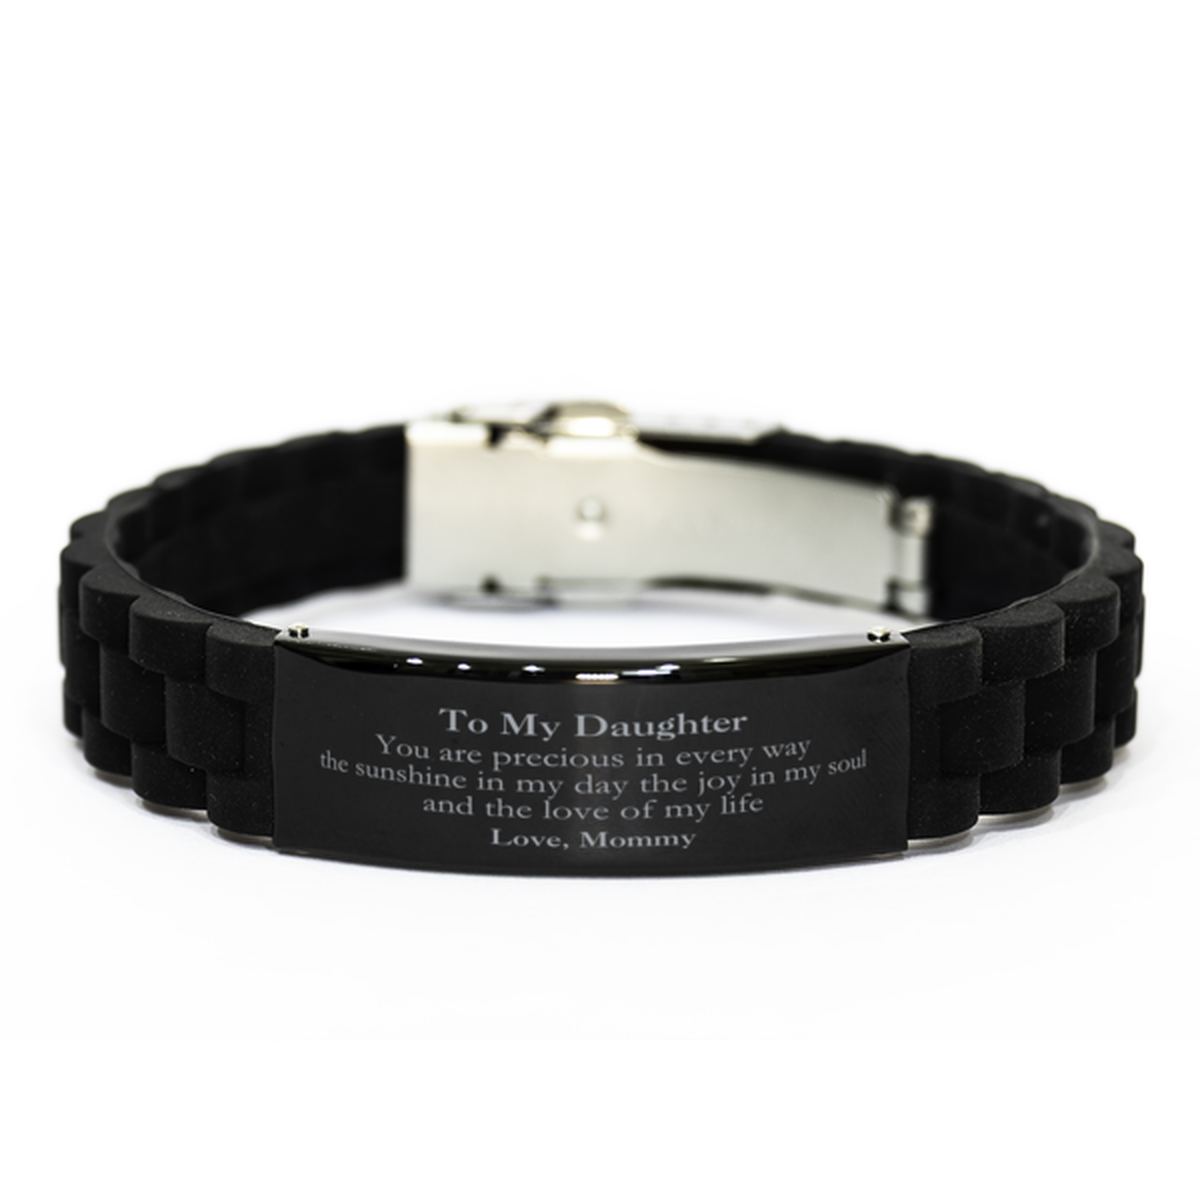 Graduation Gifts for Daughter Black Glidelock Clasp Bracelet Present from Mommy, Christmas Daughter Birthday Gifts Daughter You are precious in every way the sunshine in my day. Love, Mommy